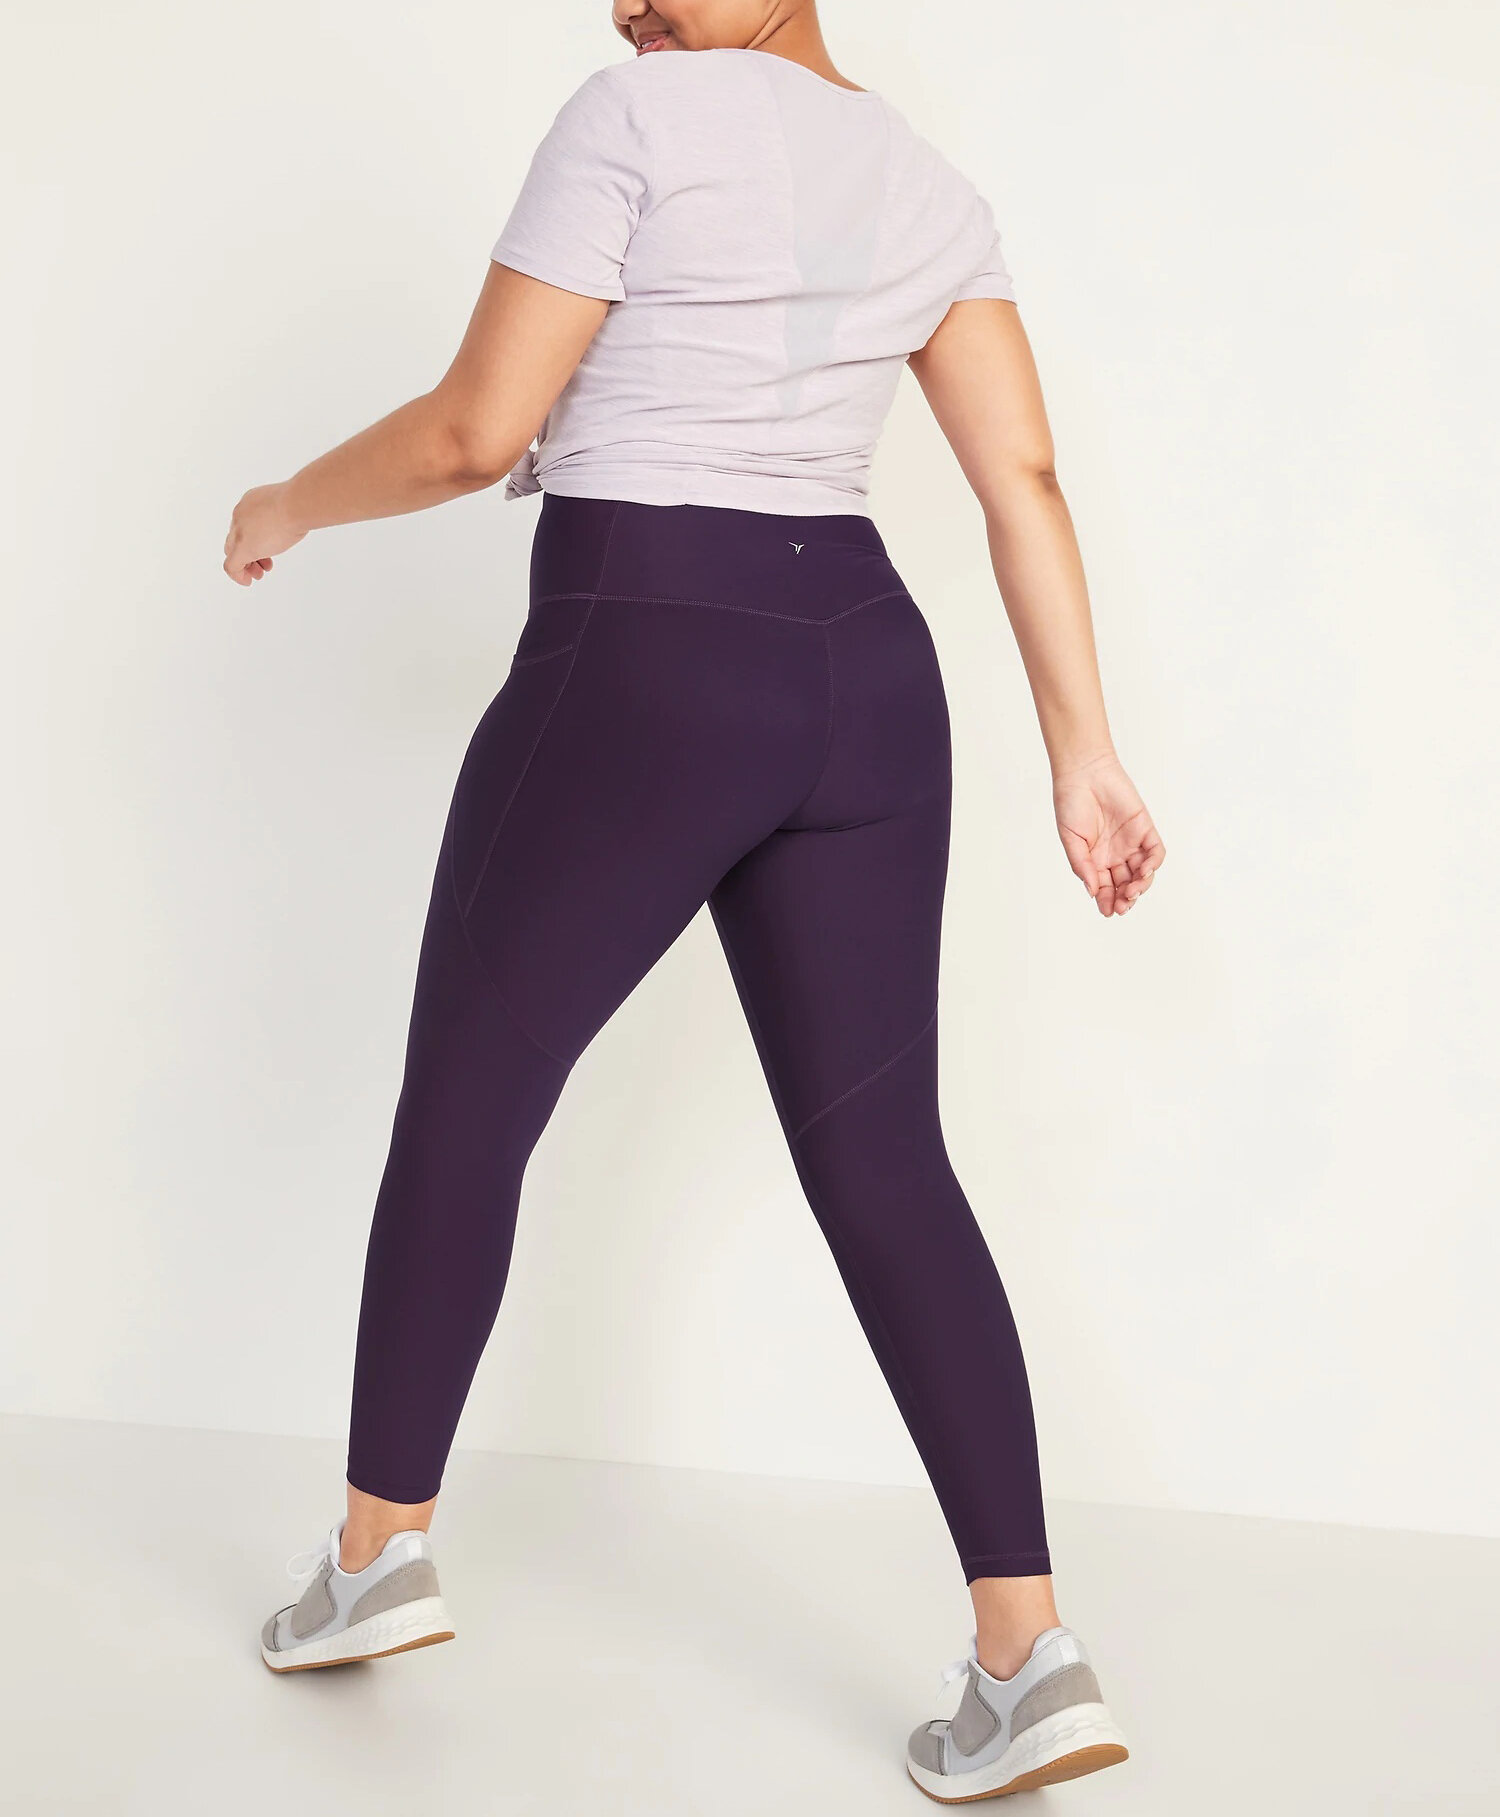 If You're Curvy, These Leggings Might Change Your Life — The Candidly